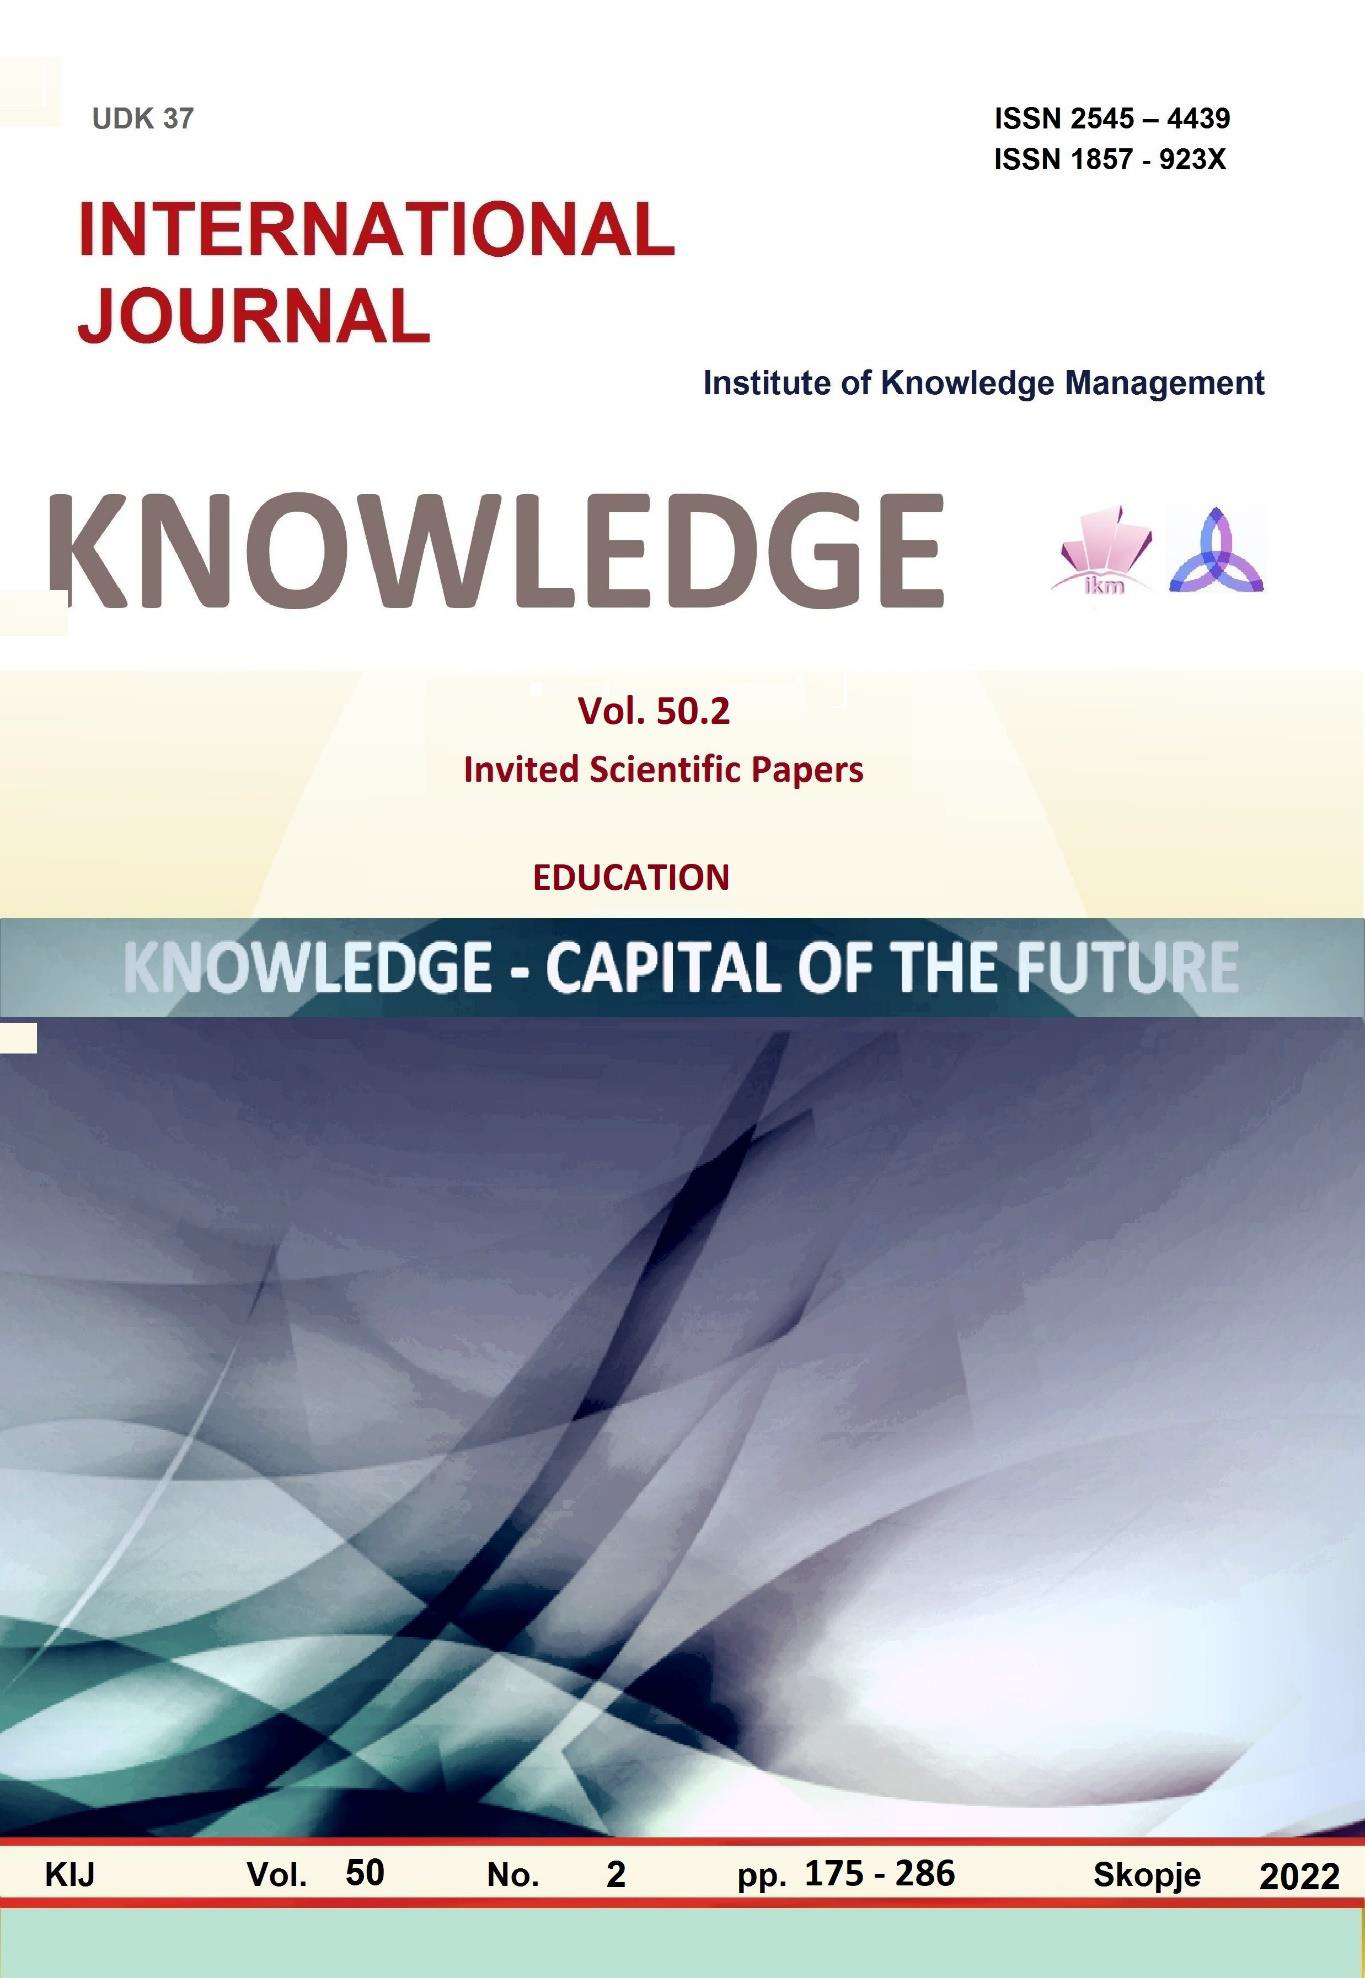 					View Vol. 50 No. 2 (2022): Knowledge - Capital Of The Future
				